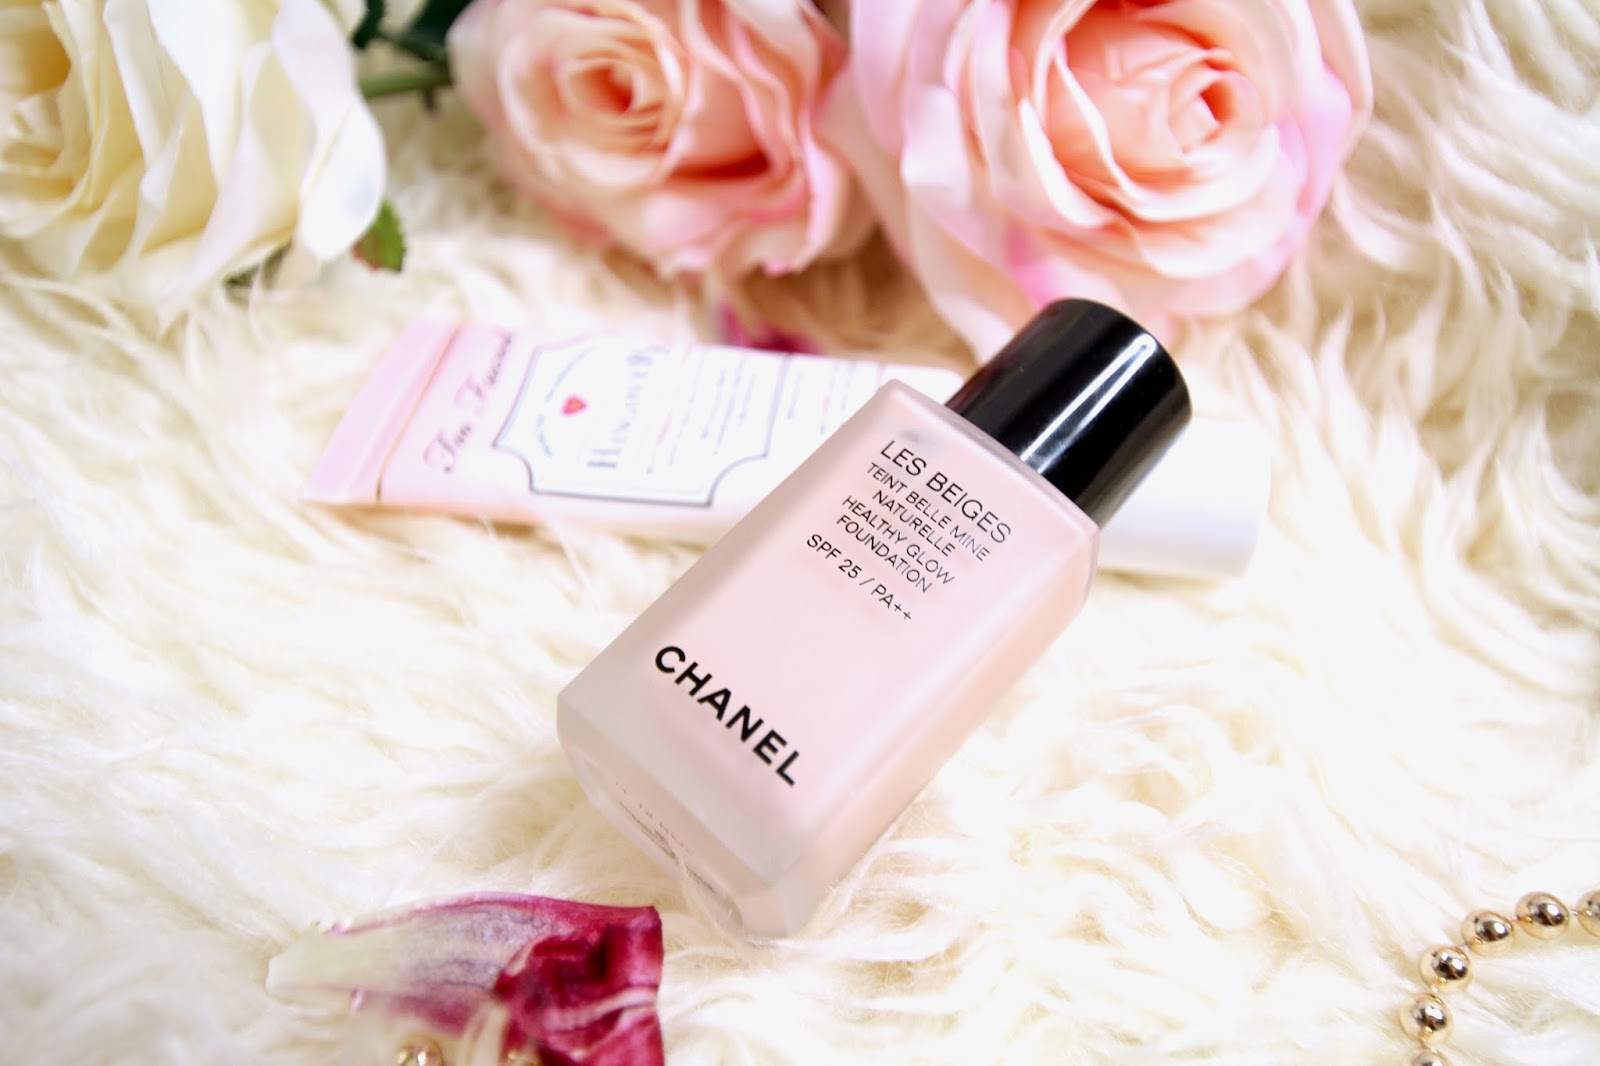 Chanel Les Beiges Healthy Glow Foundation, Review - Blushy Darling